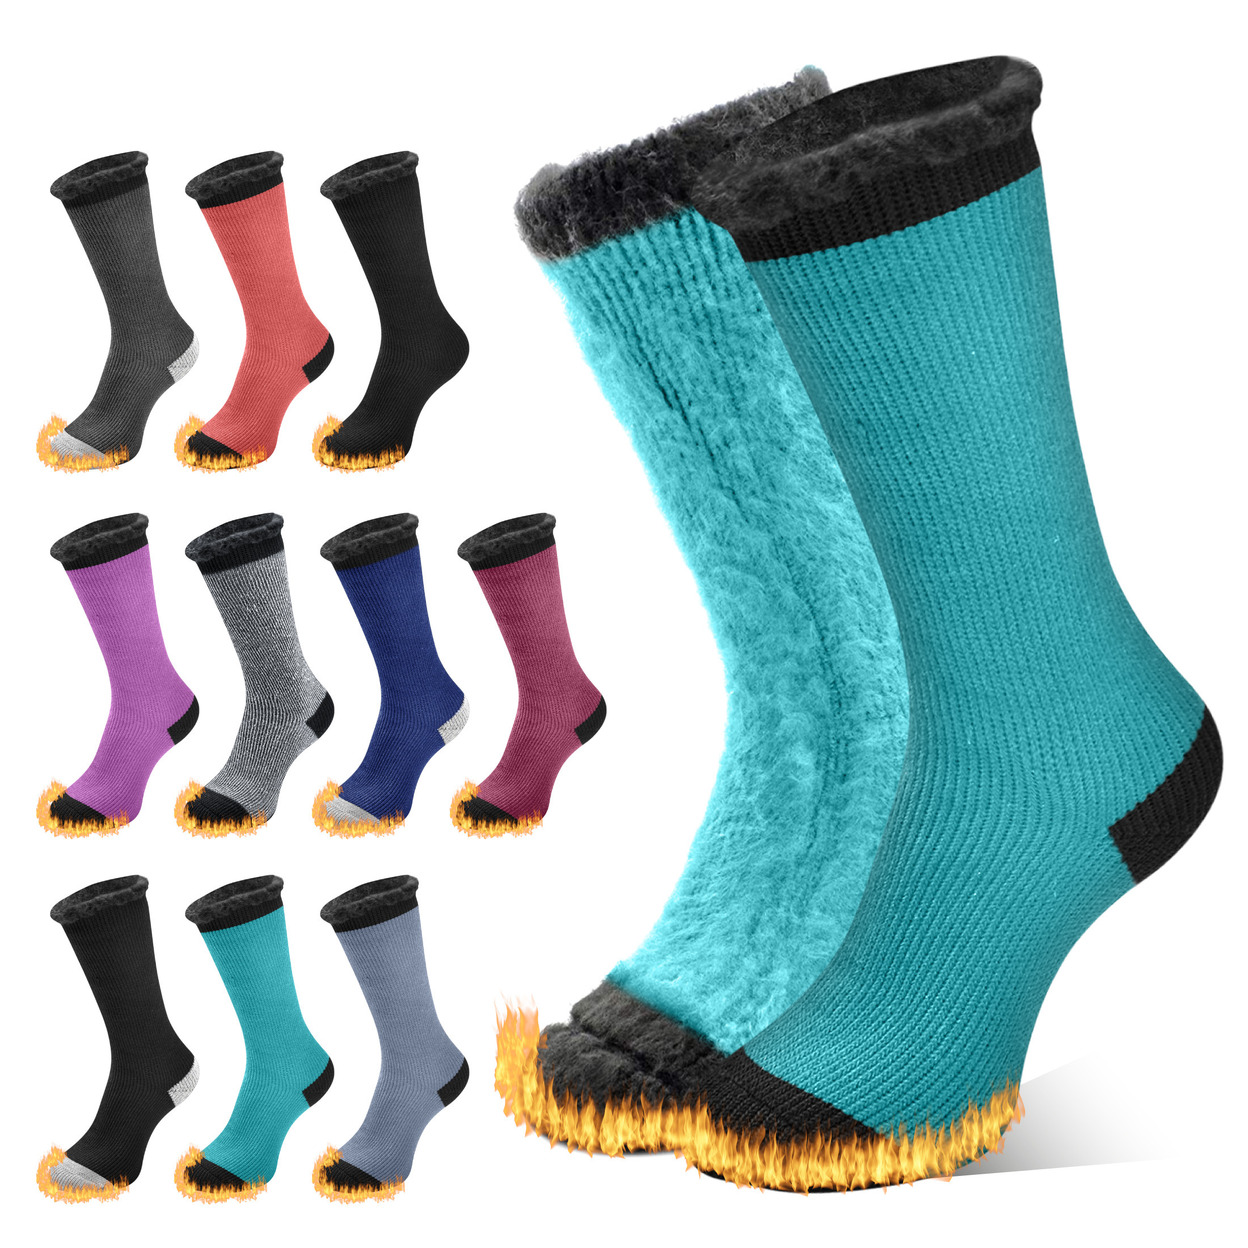 4-Pairs: Men's Thermal Insulated Brushed Lined Warm Heated Winter Socks For Cold Weather